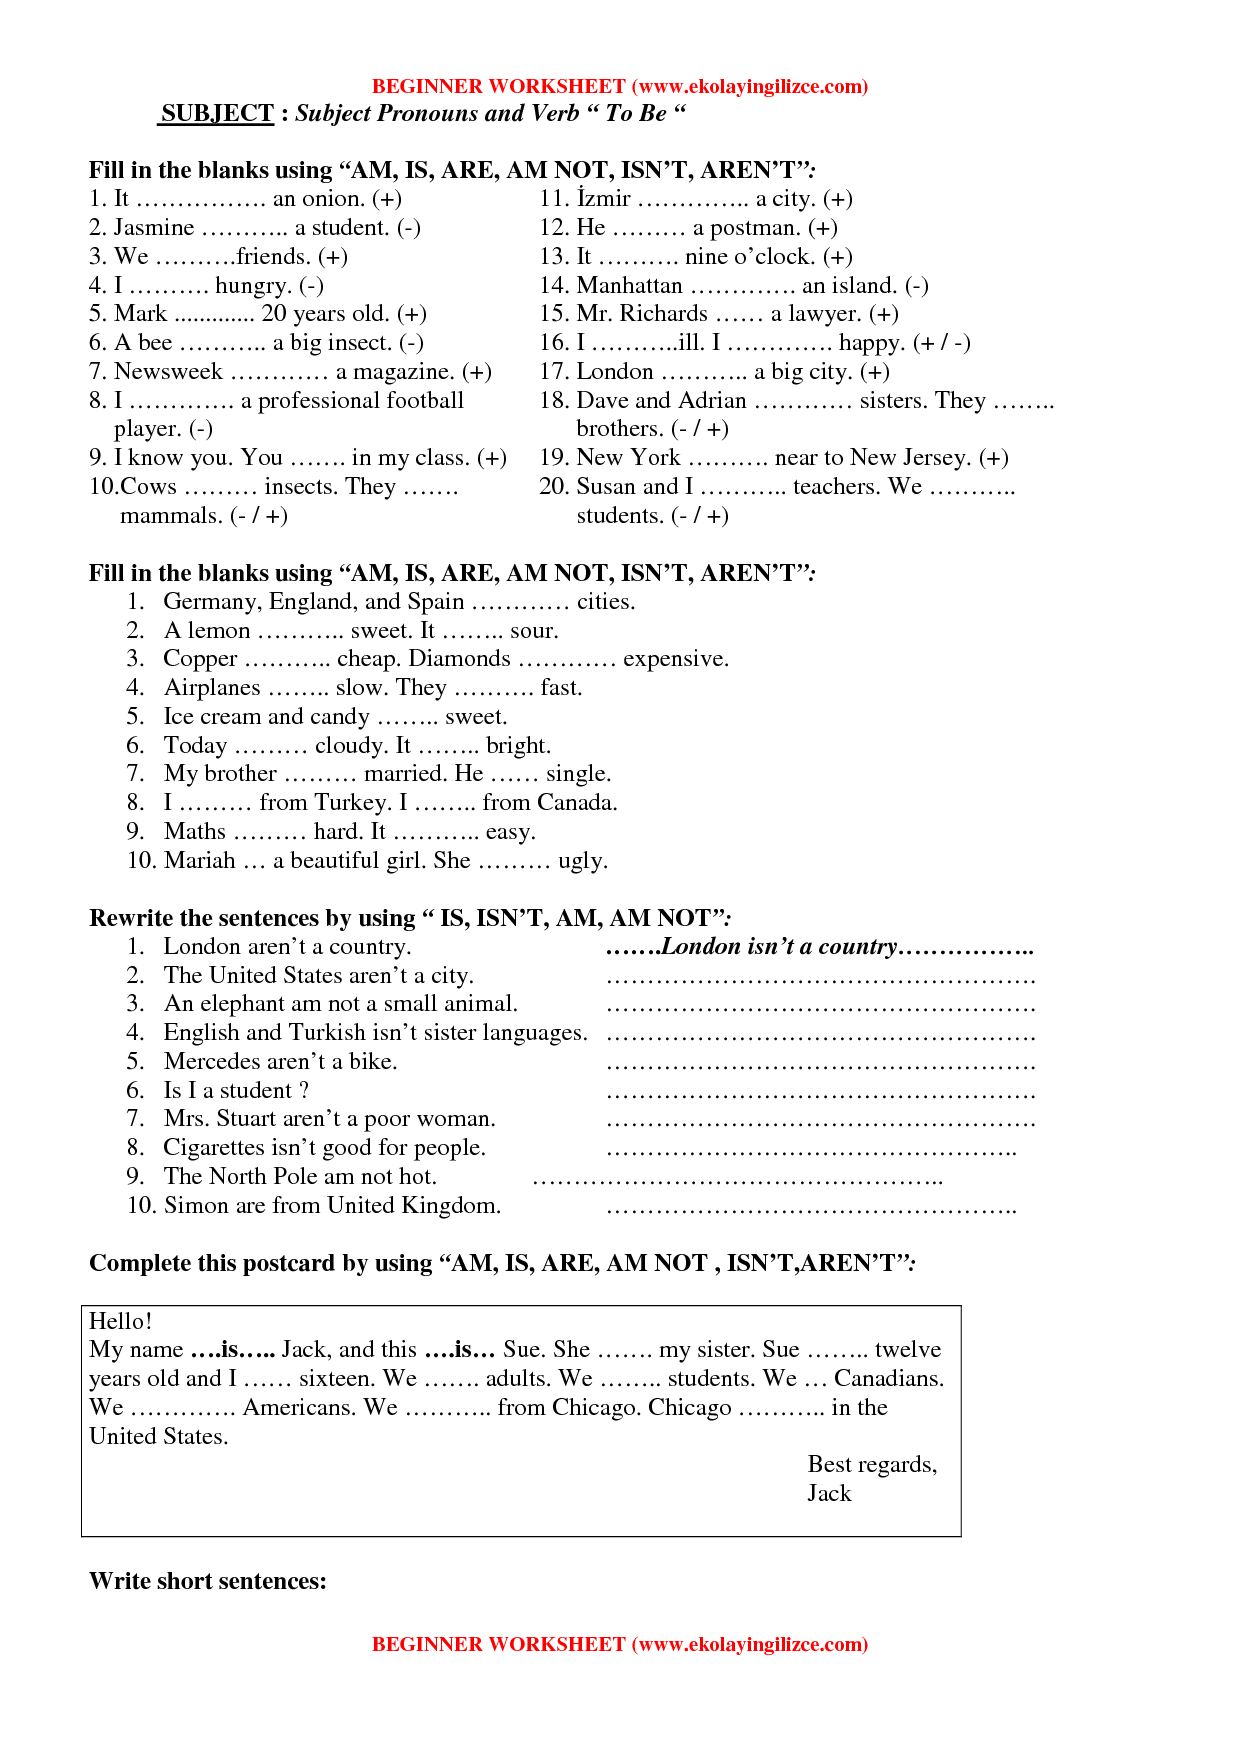 15 Best Images Of Subject Pronouns Worksheet 1 Subject Pronouns Worksheets For 1st Grade 6th